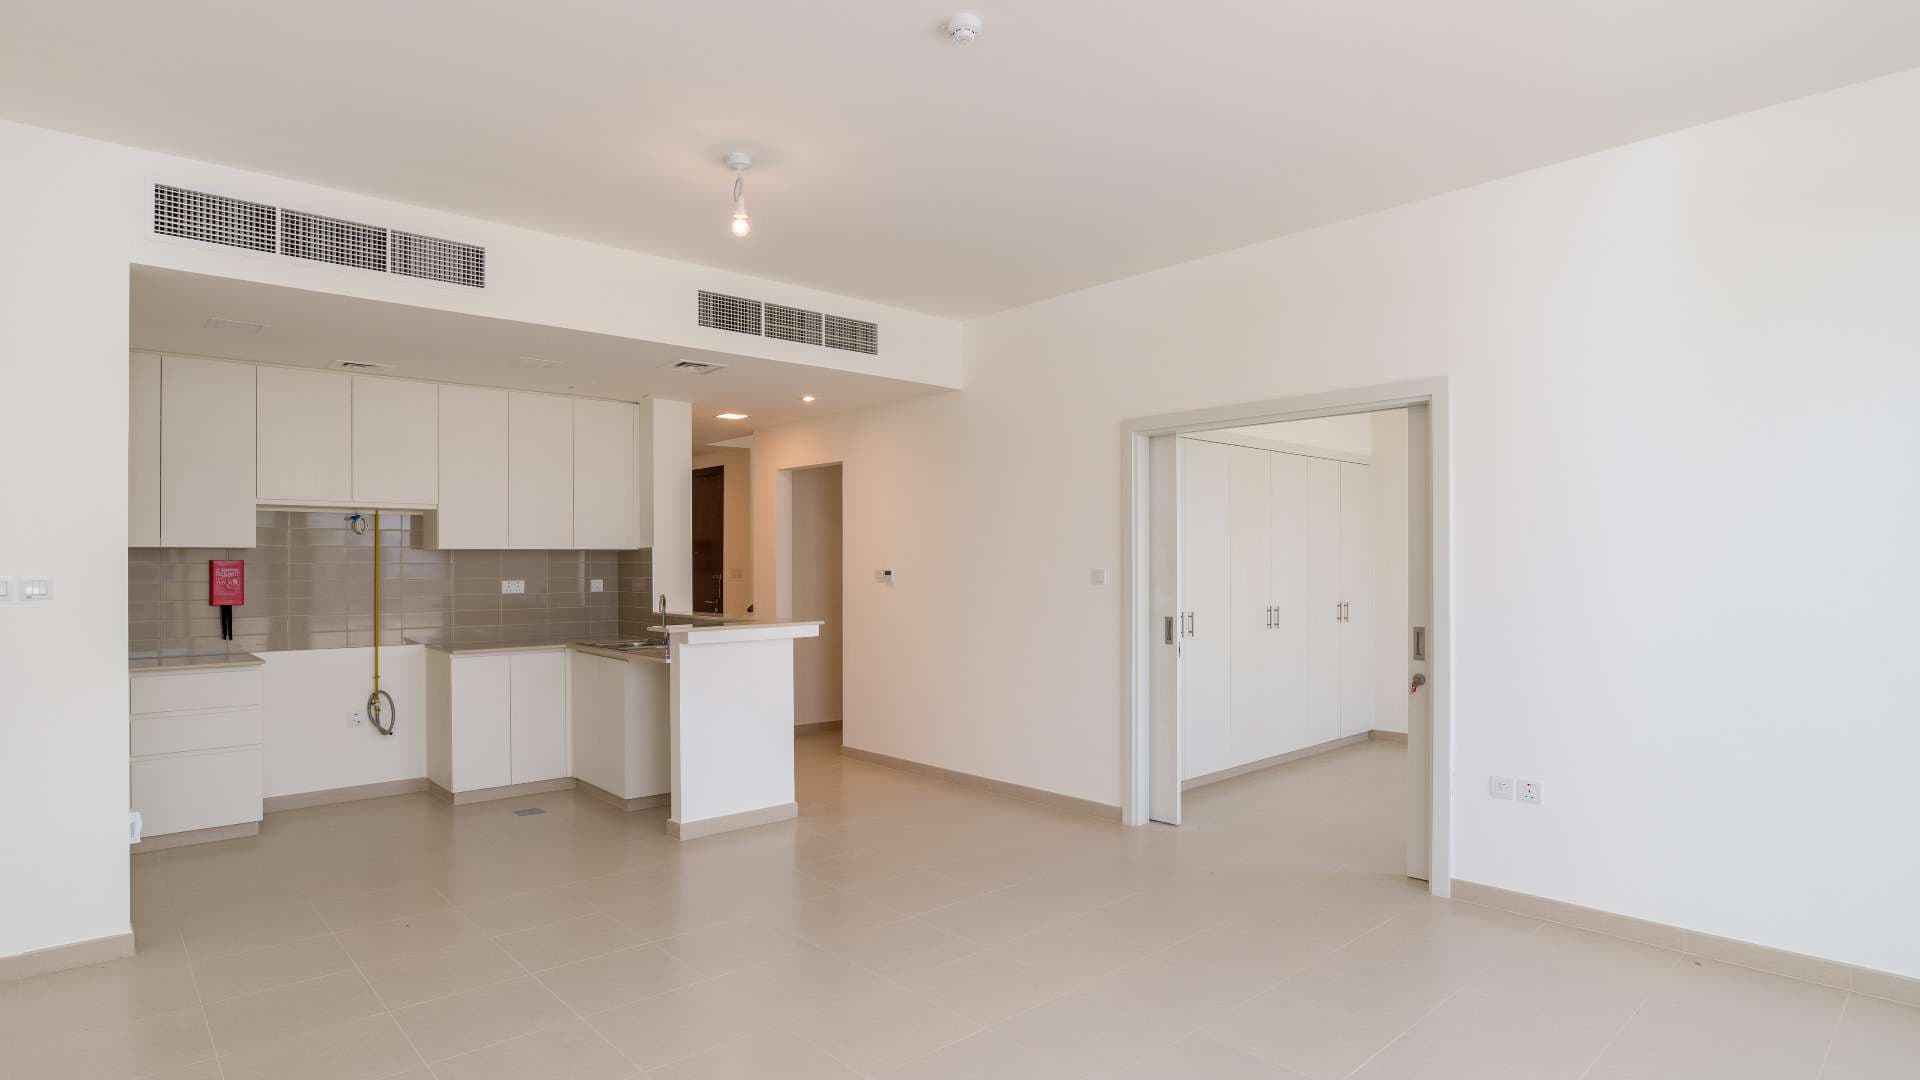 4 Bedroom Townhouse For Sale Naseem Townhouses Lp07887 2a4a21bef1e17200.jpg